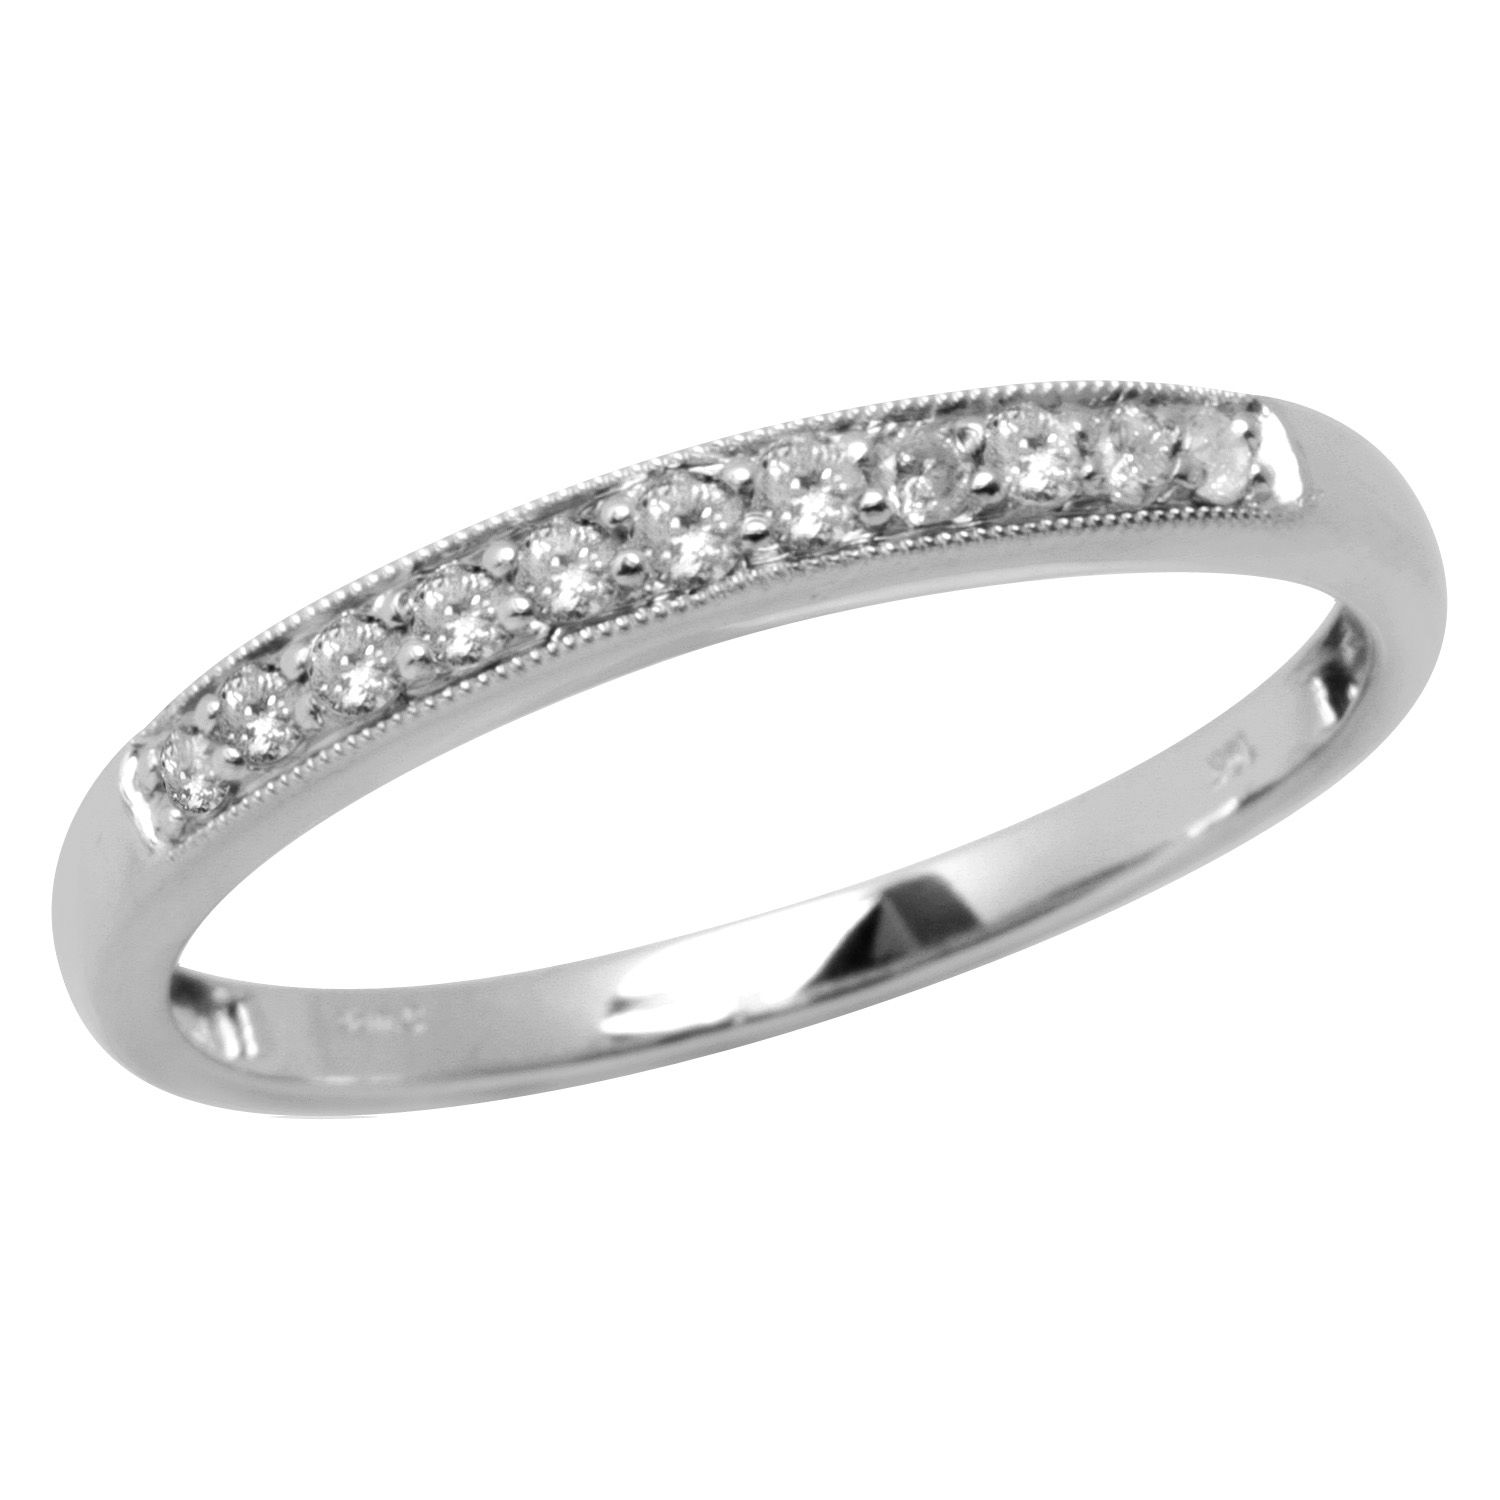 1/5 cttw Diamond Stackable Ring_in Size 7